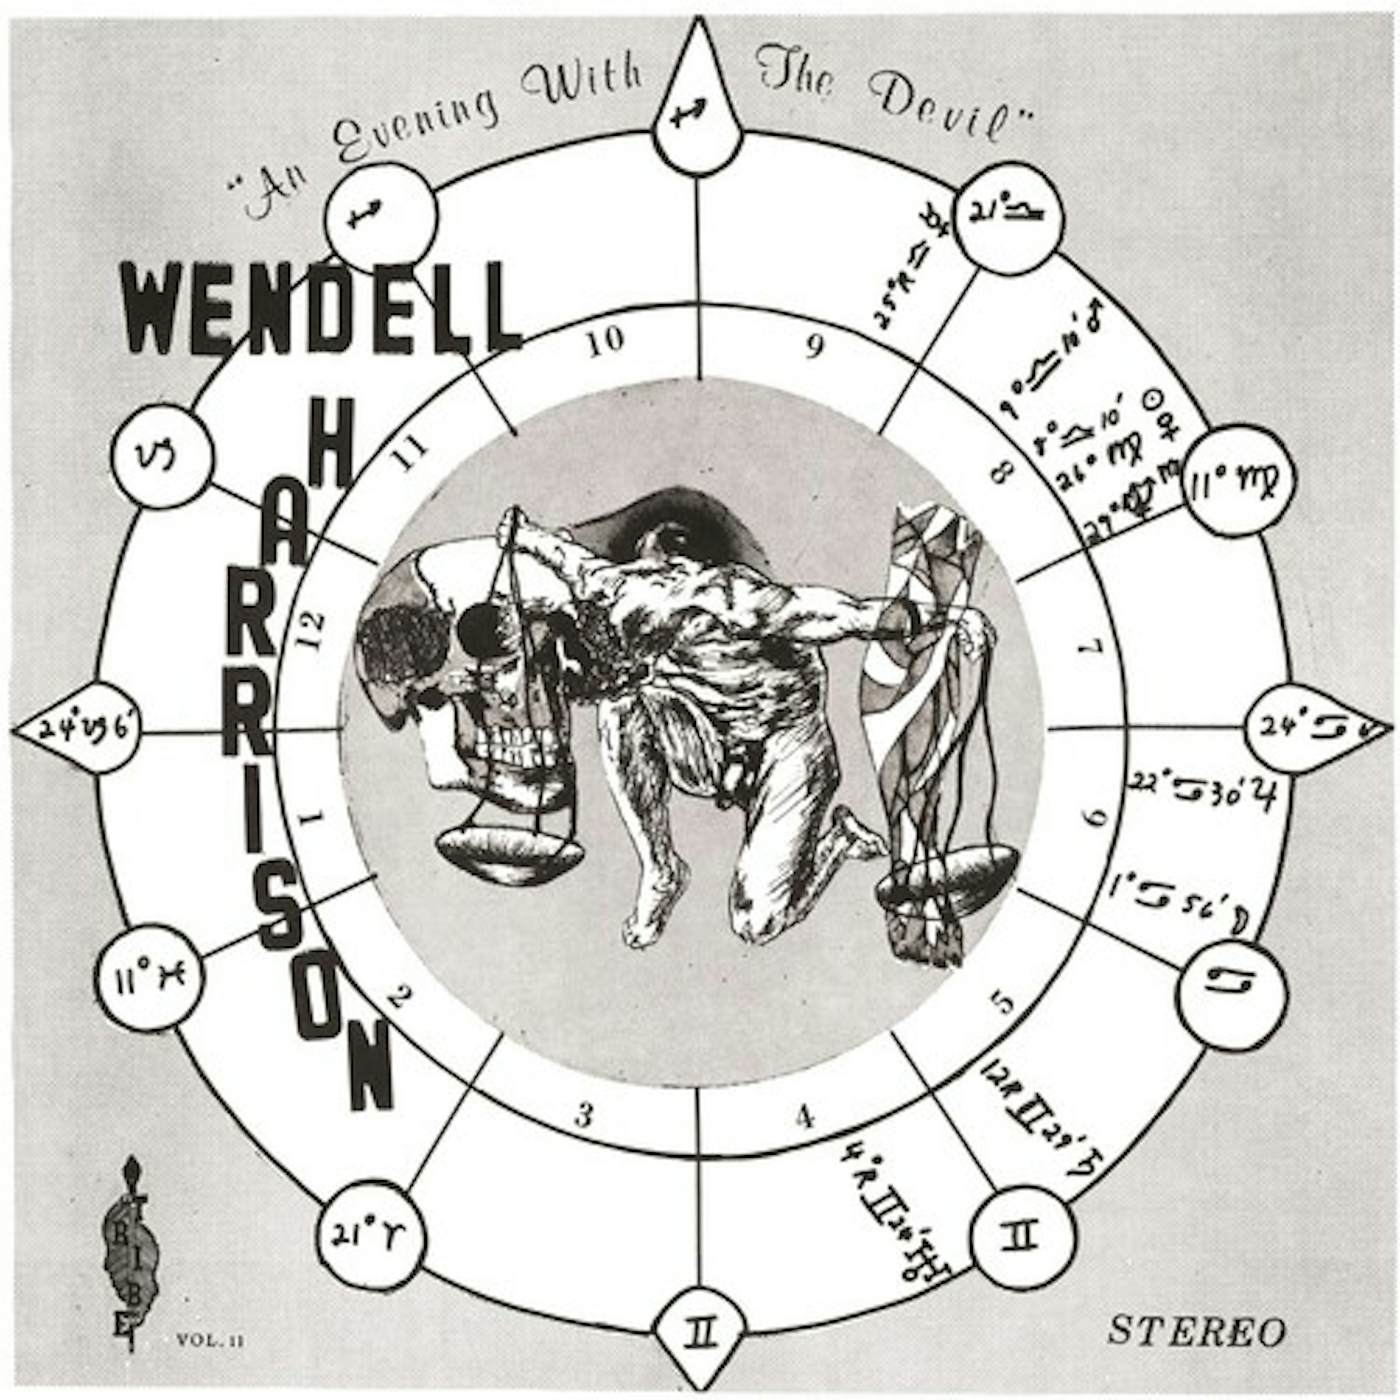 Wendell Harrison EVENING WITH THE DEVIL Vinyl Record